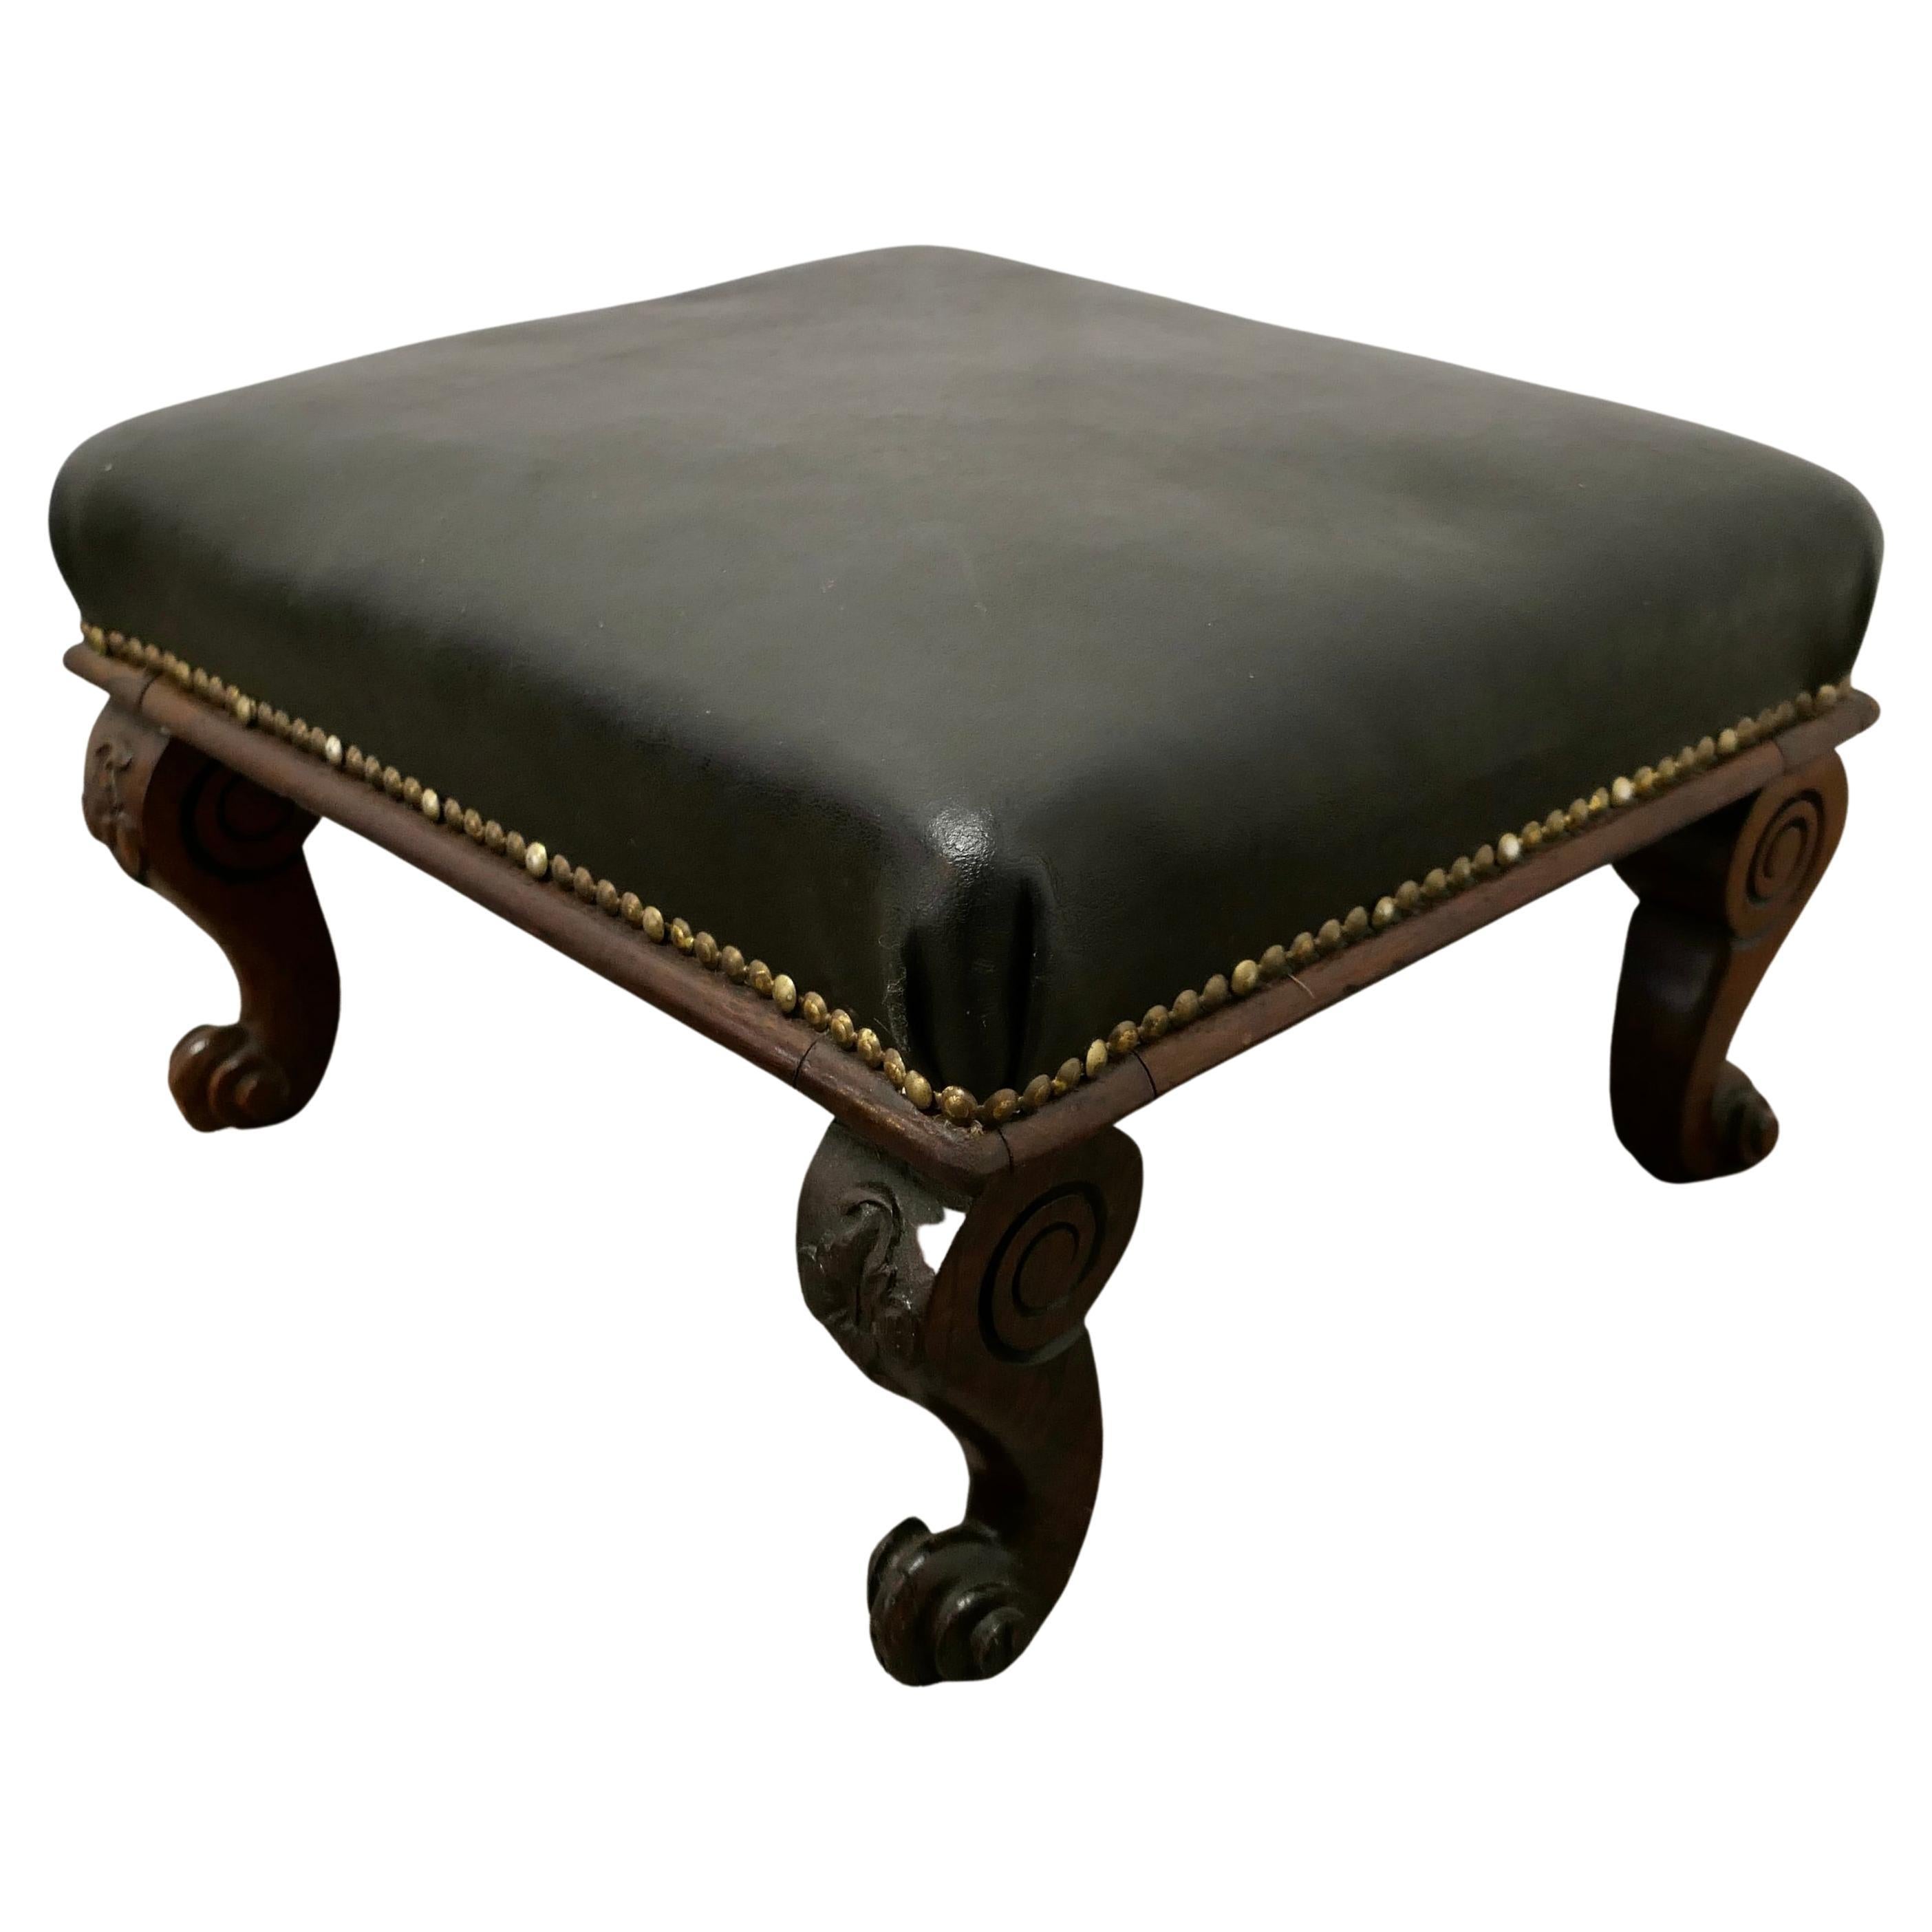 Victorian Country House Foot Stool Upholstered in Leather